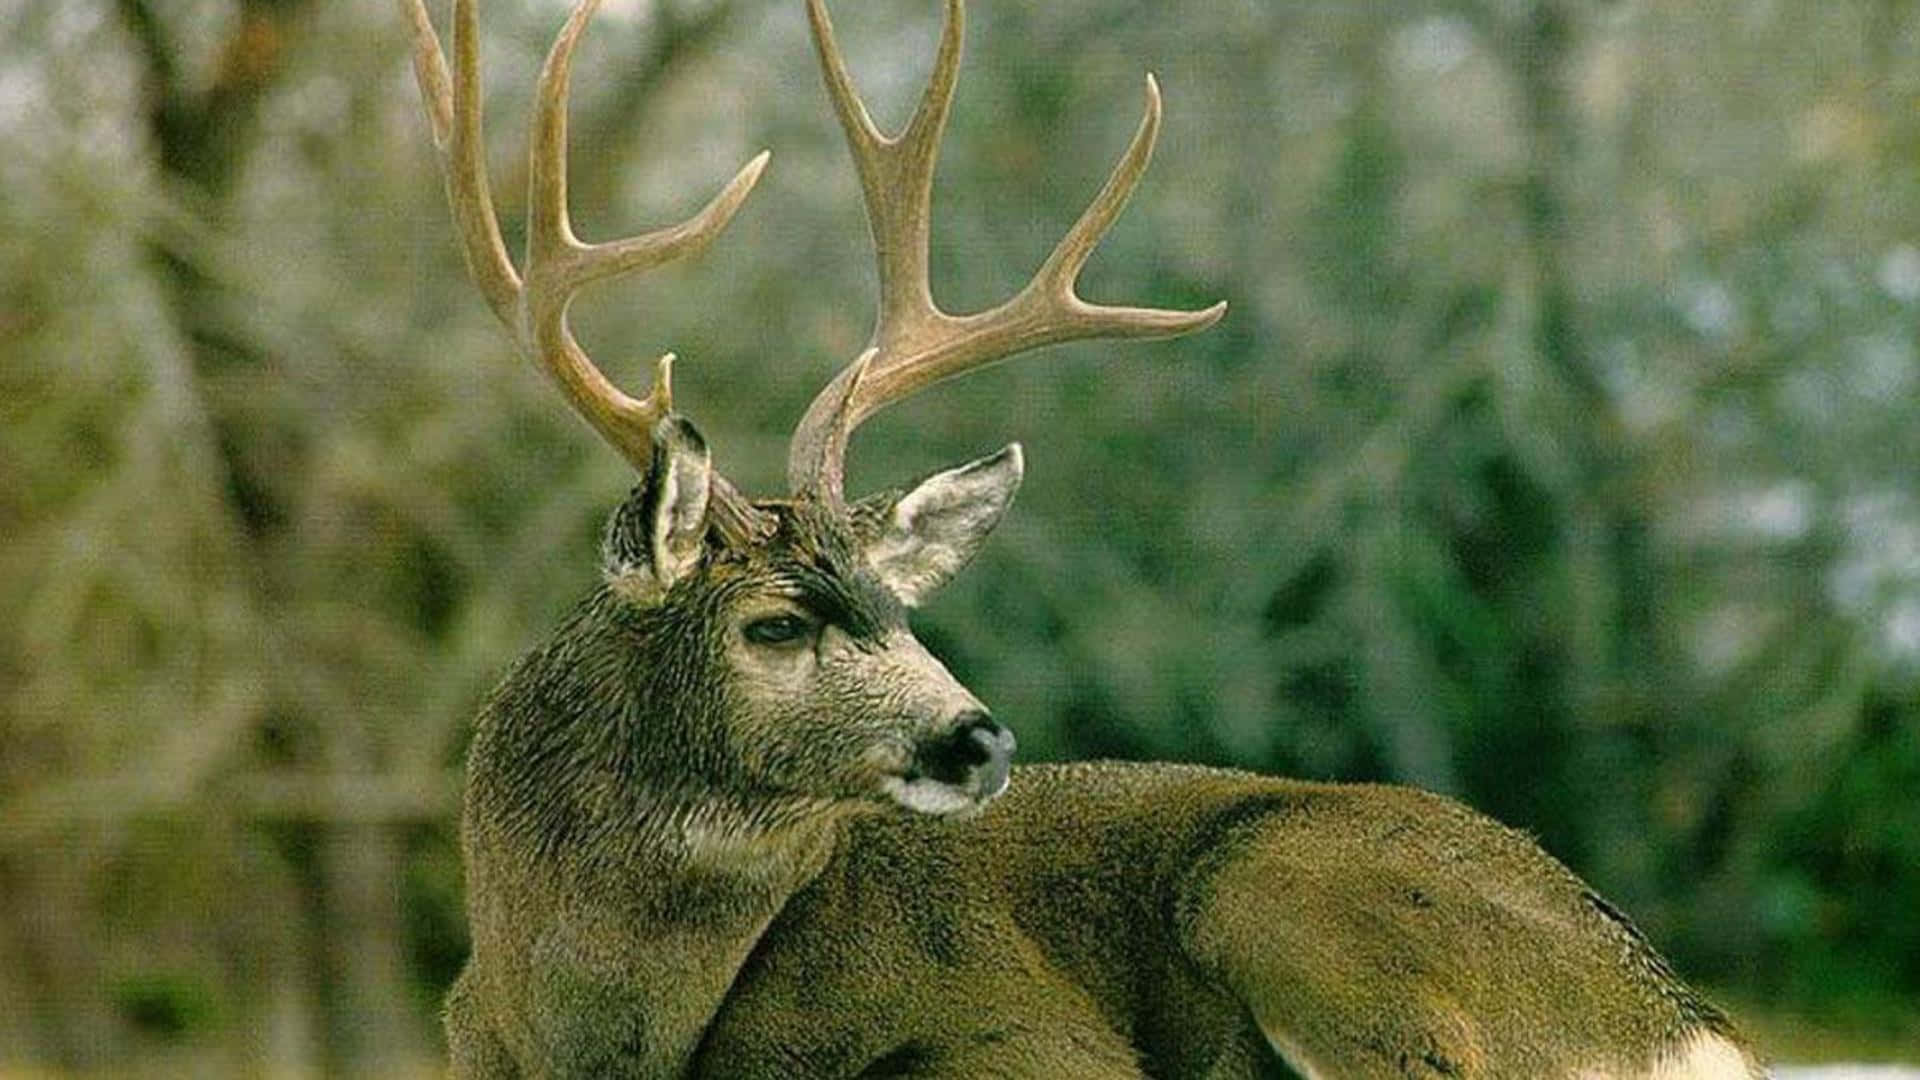 A majestic Whitetail Deer standing in the forest Wallpaper